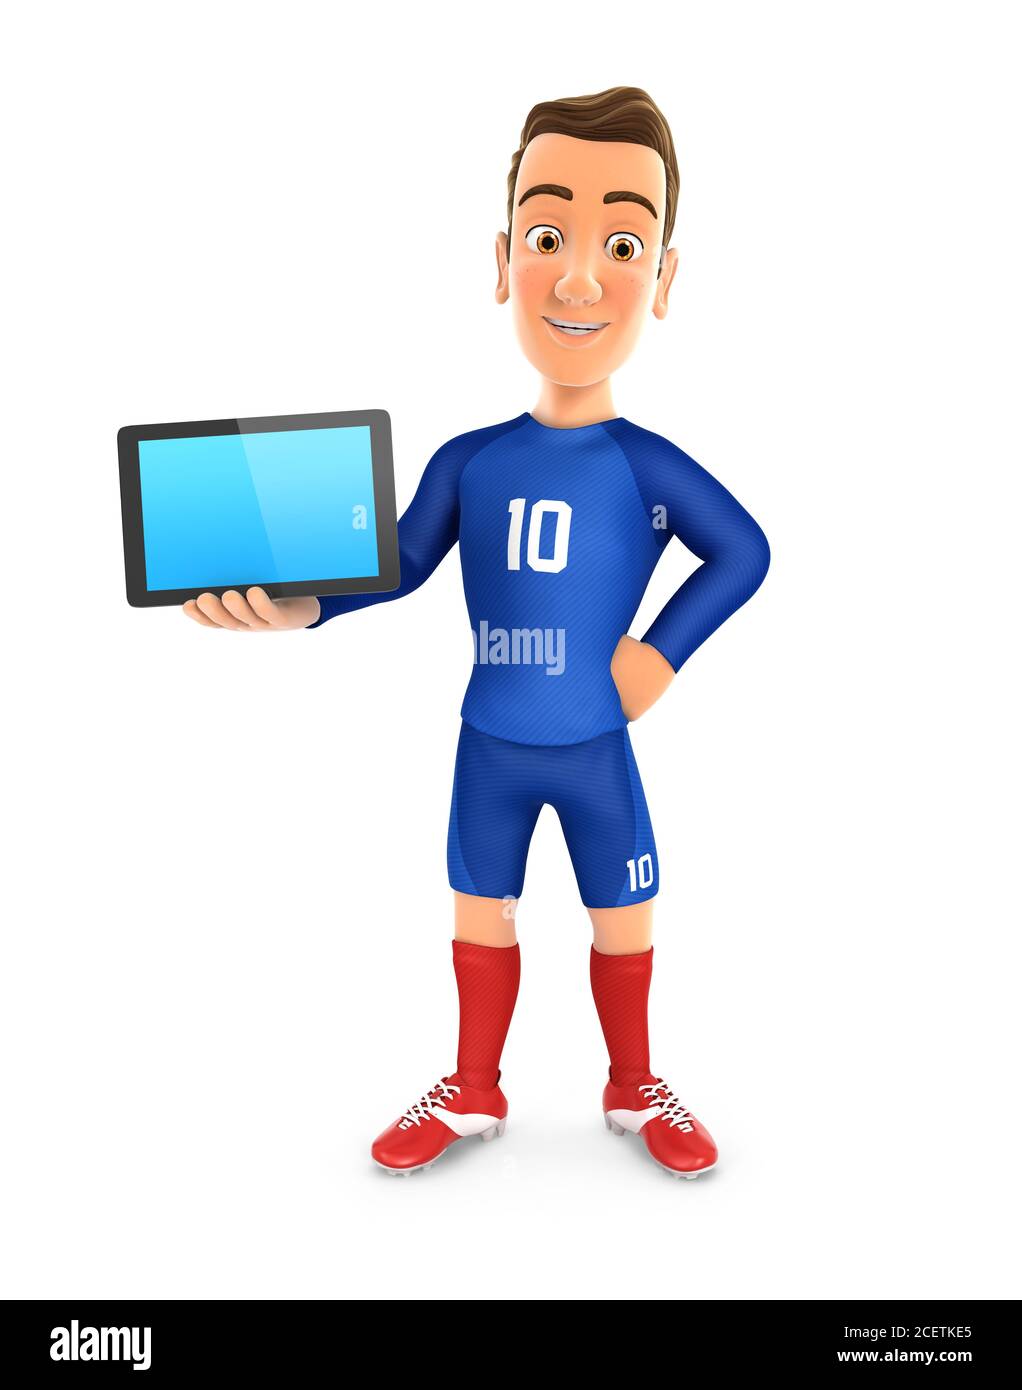 3d soccer player blue jersey standing with a tablet, illustration with isolated white background Stock Photo